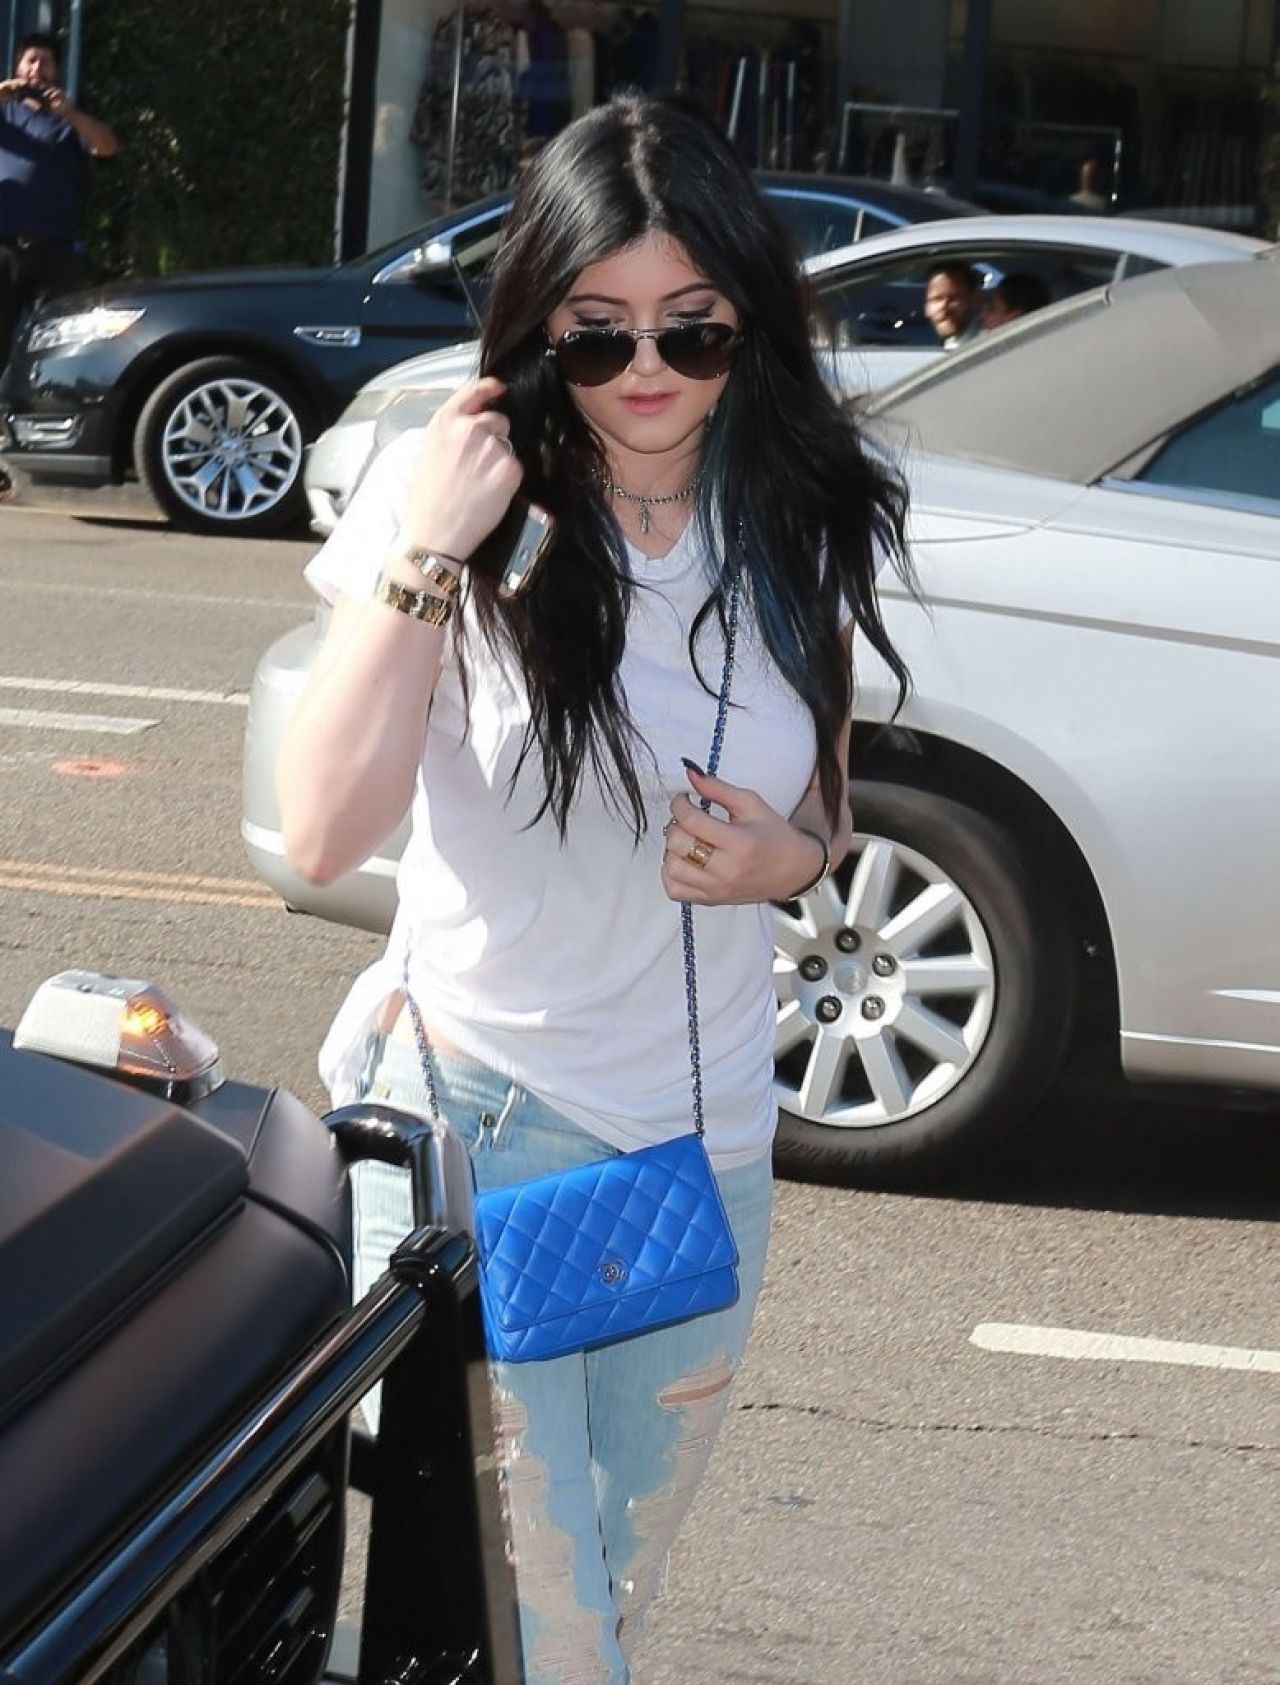 Kylie Jenner in Jeans in West Hollywood, Los Angeles